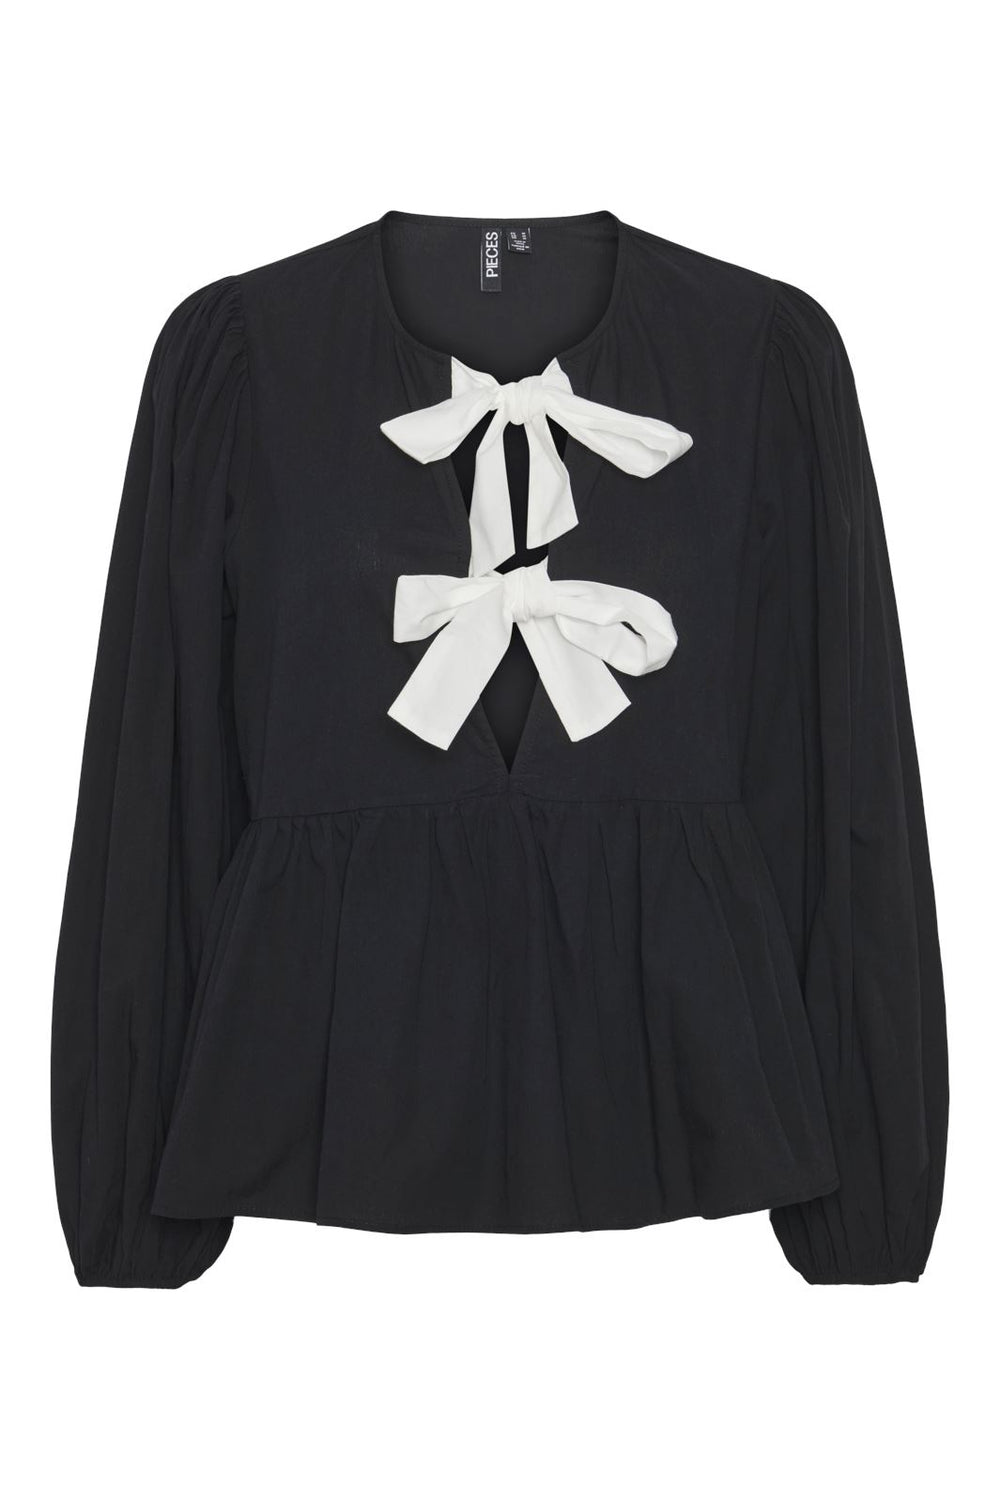 Pieces - Pcgolly Ls Bow Top Jit - 4632114 Black White Bows